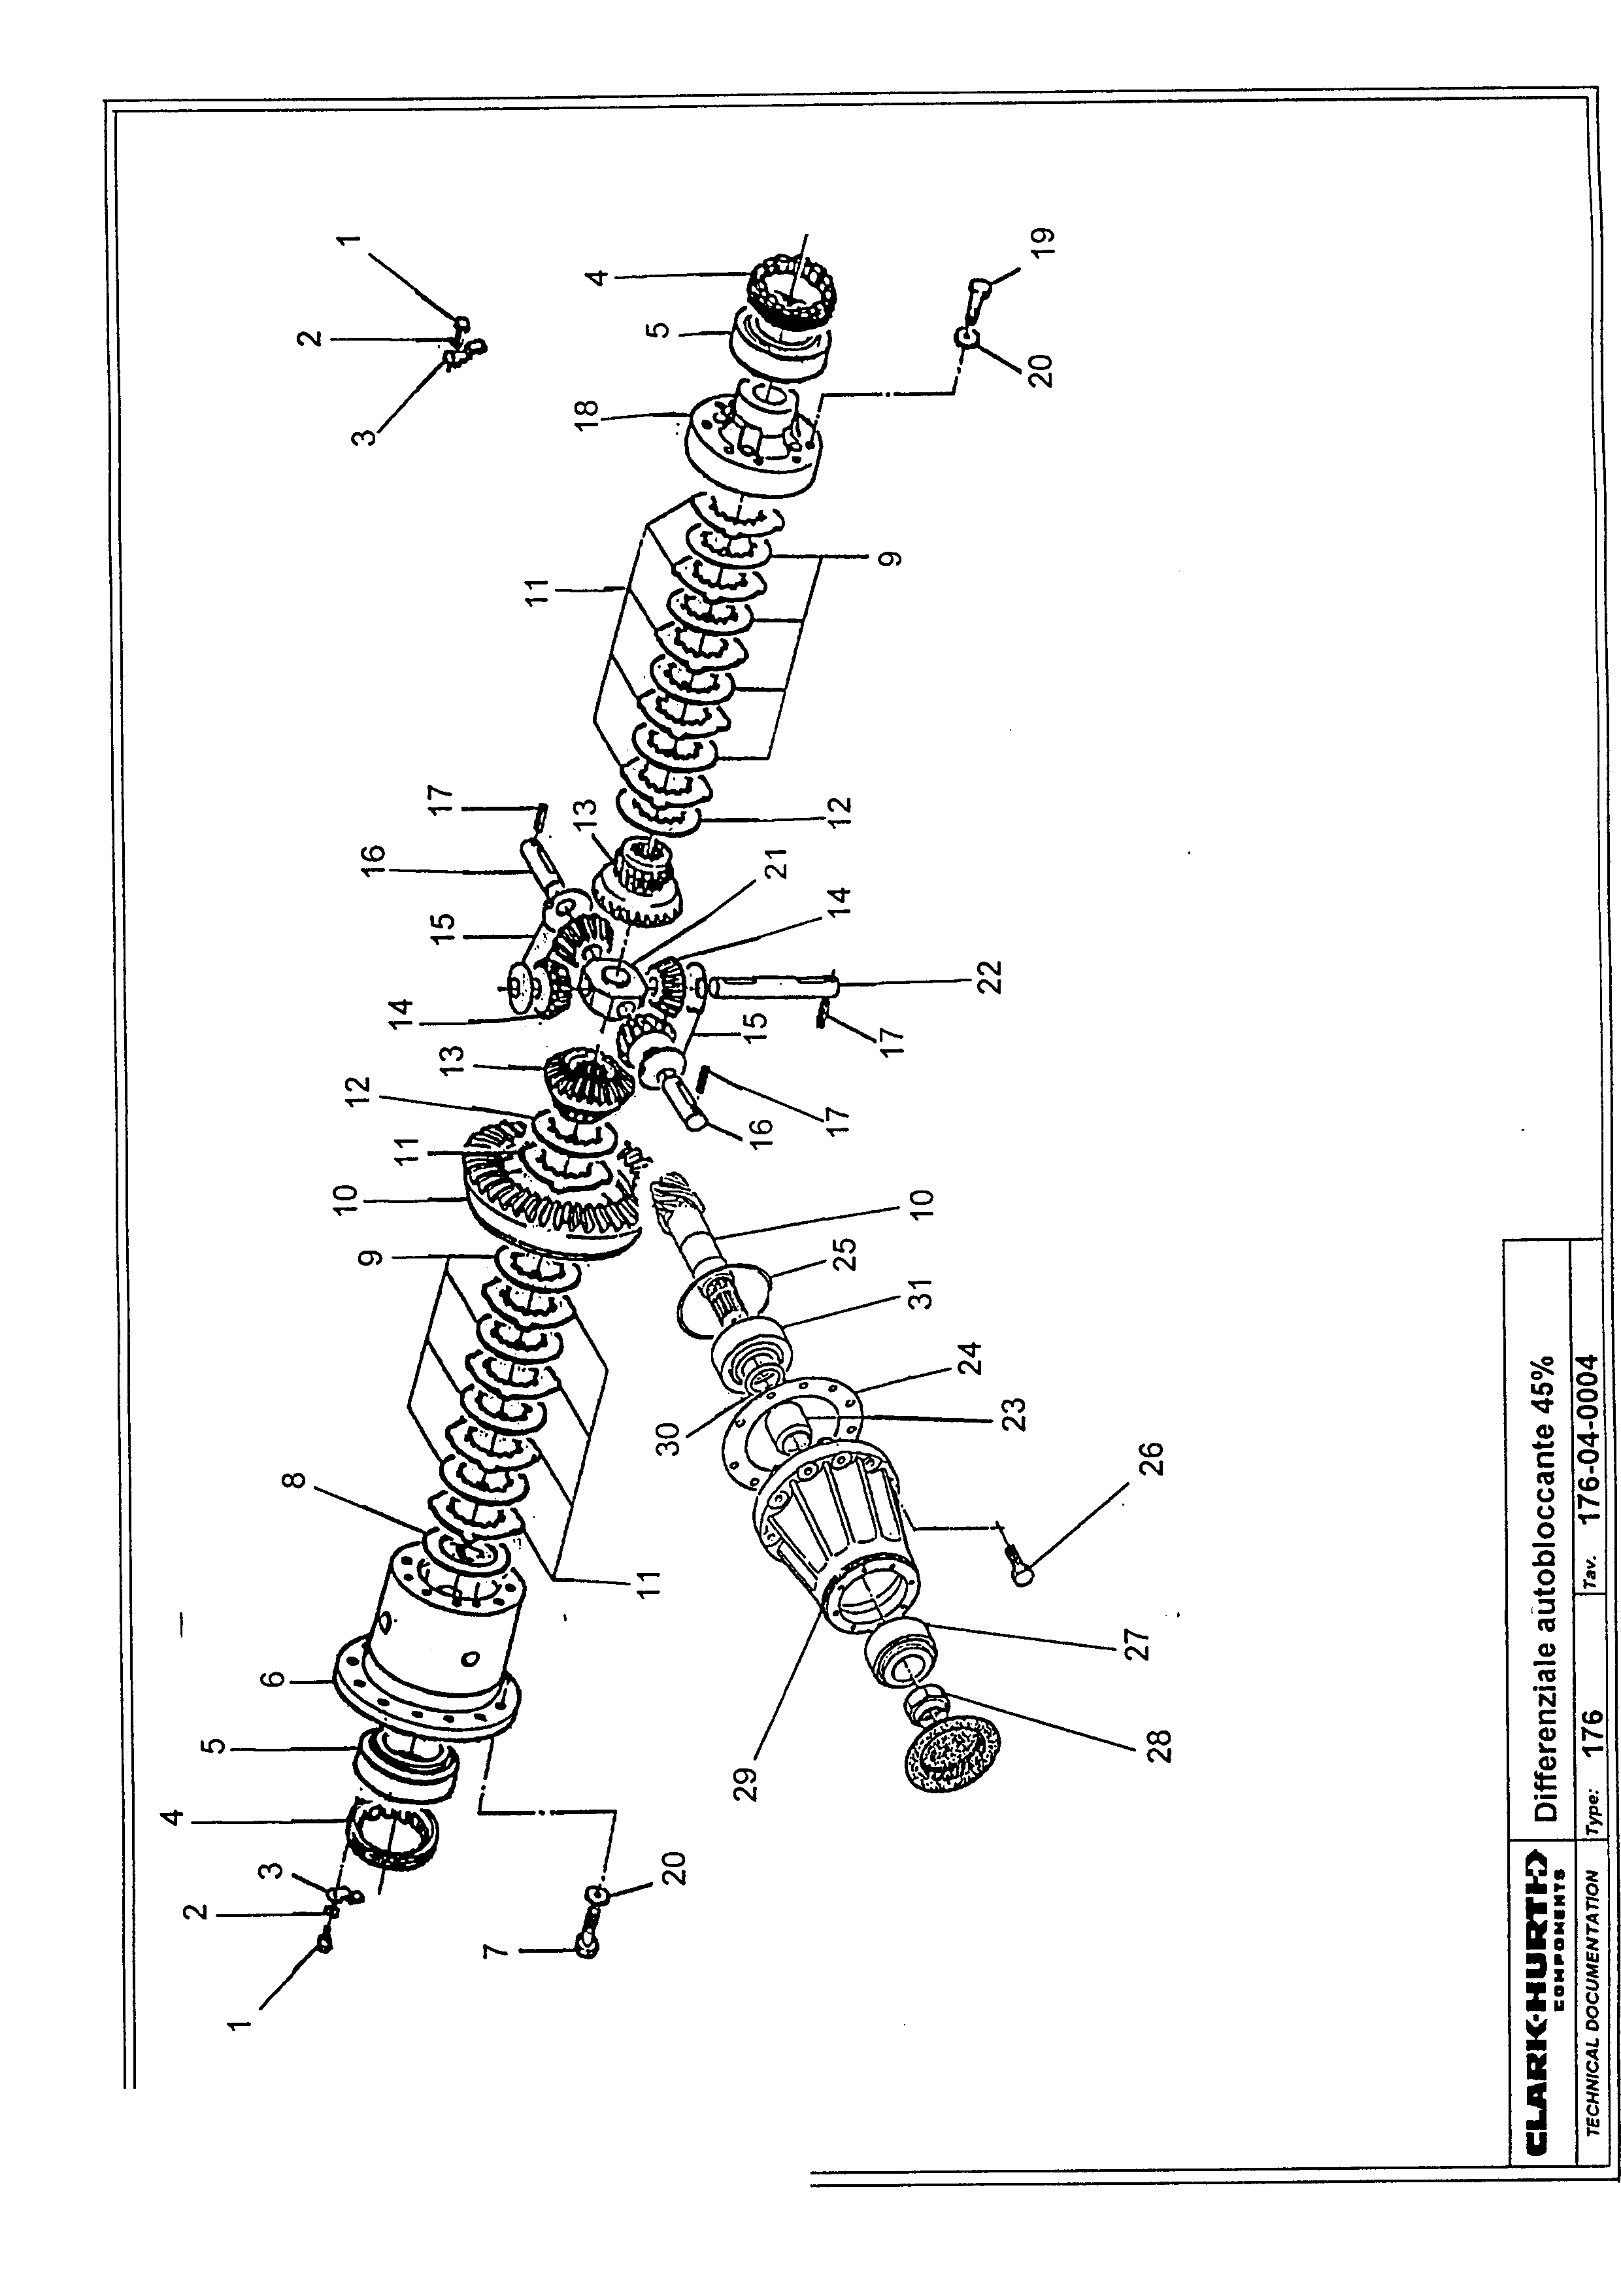 drawing for INTERNATIONAL 148905A1 - FRICTION PLATE (figure 3)